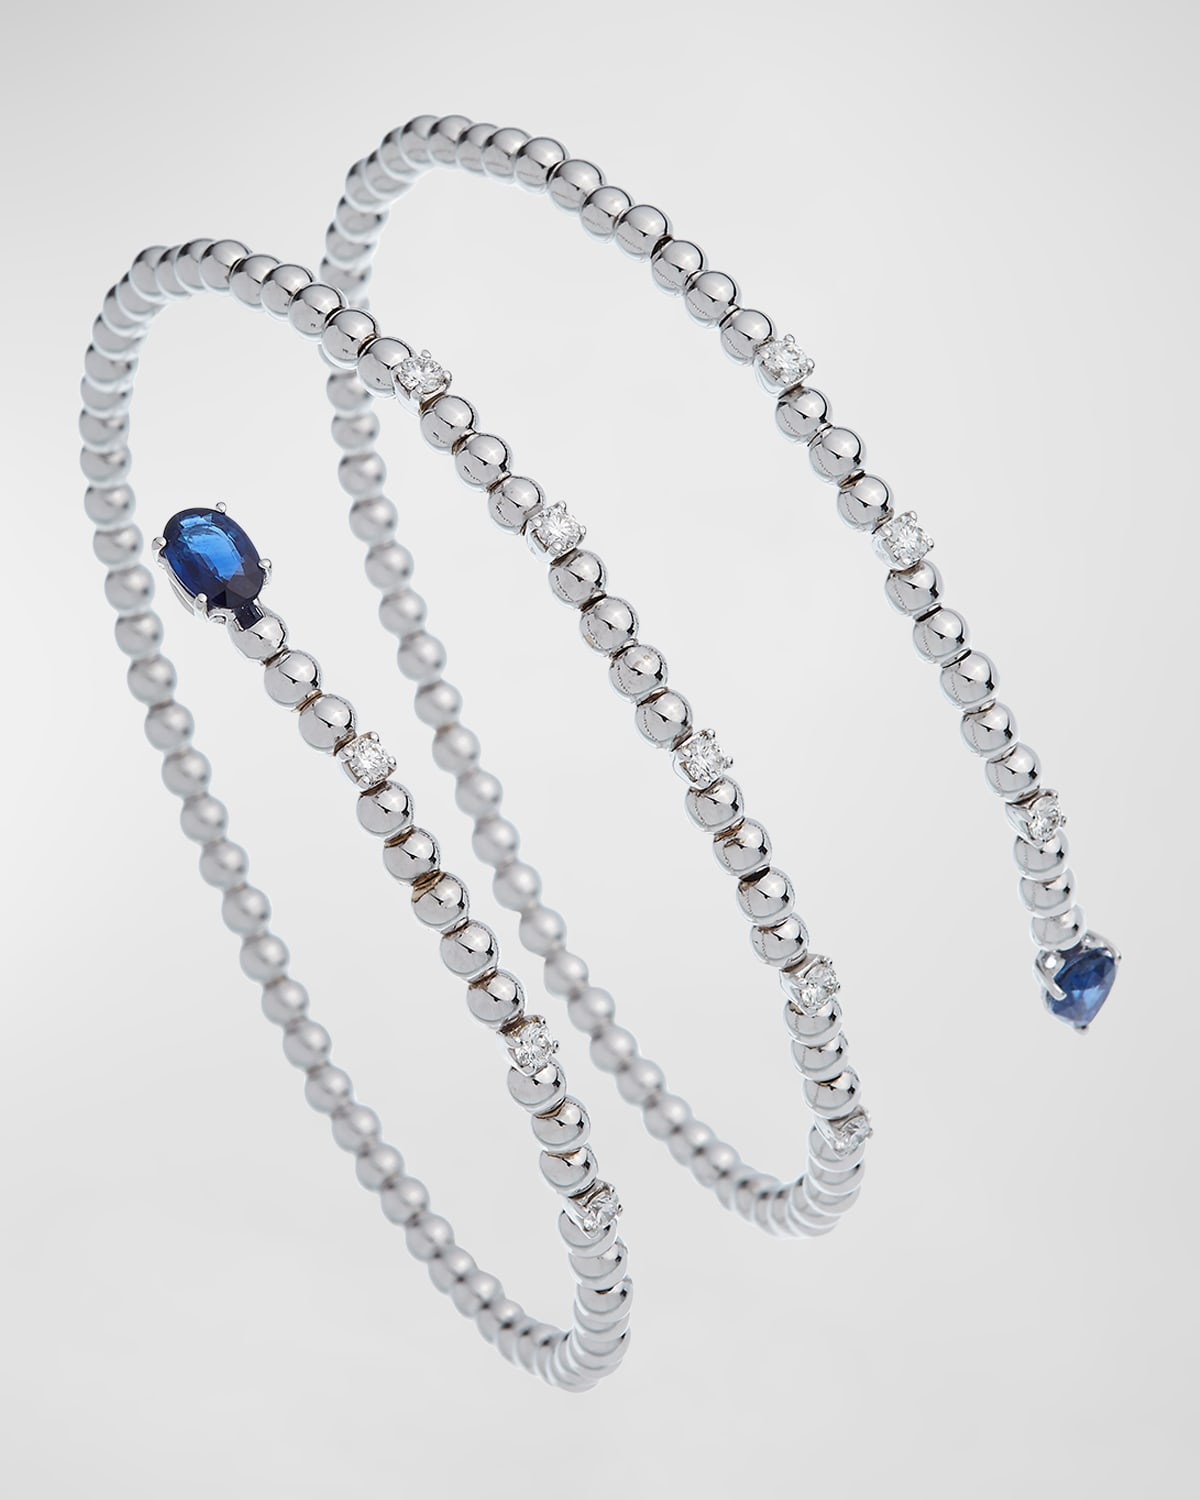 18K White Gold Bracelet with Diamonds and Blue Sapphires